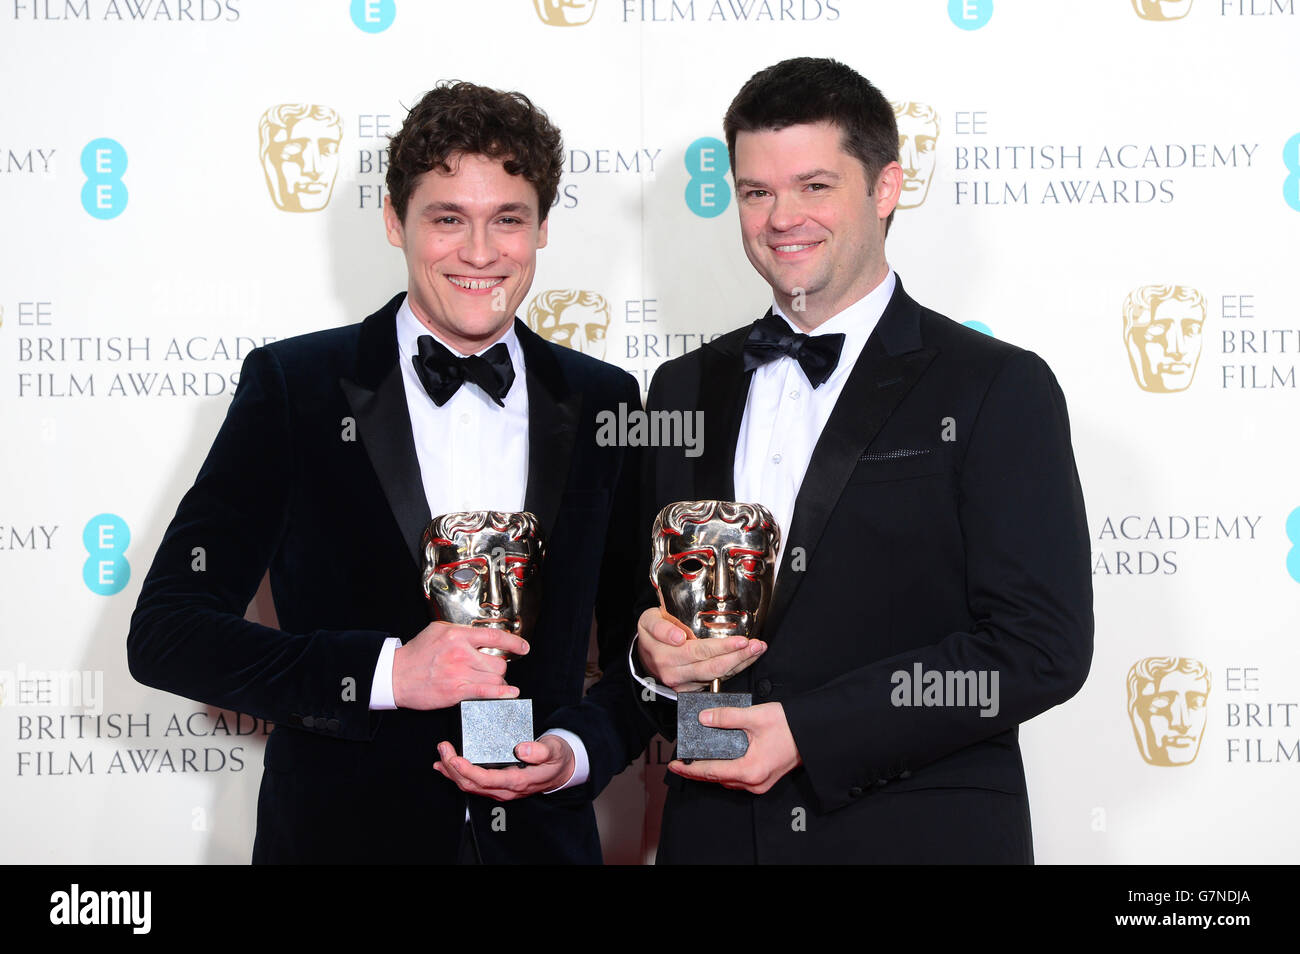 Phil Lord and Christopher Miller (right), winners of the Best Animated Film award for the movie 'Lego Movie', at the EE British Academy Film Awards at the Royal Opera House, Bow Street in London. PRESS ASSOCIATION Photo. Picture date: Sunday February 8, 2015. See PA story SHOWBIZ Bafta. Photo credit should read: Dominic Lipinski/PA Wire Stock Photo